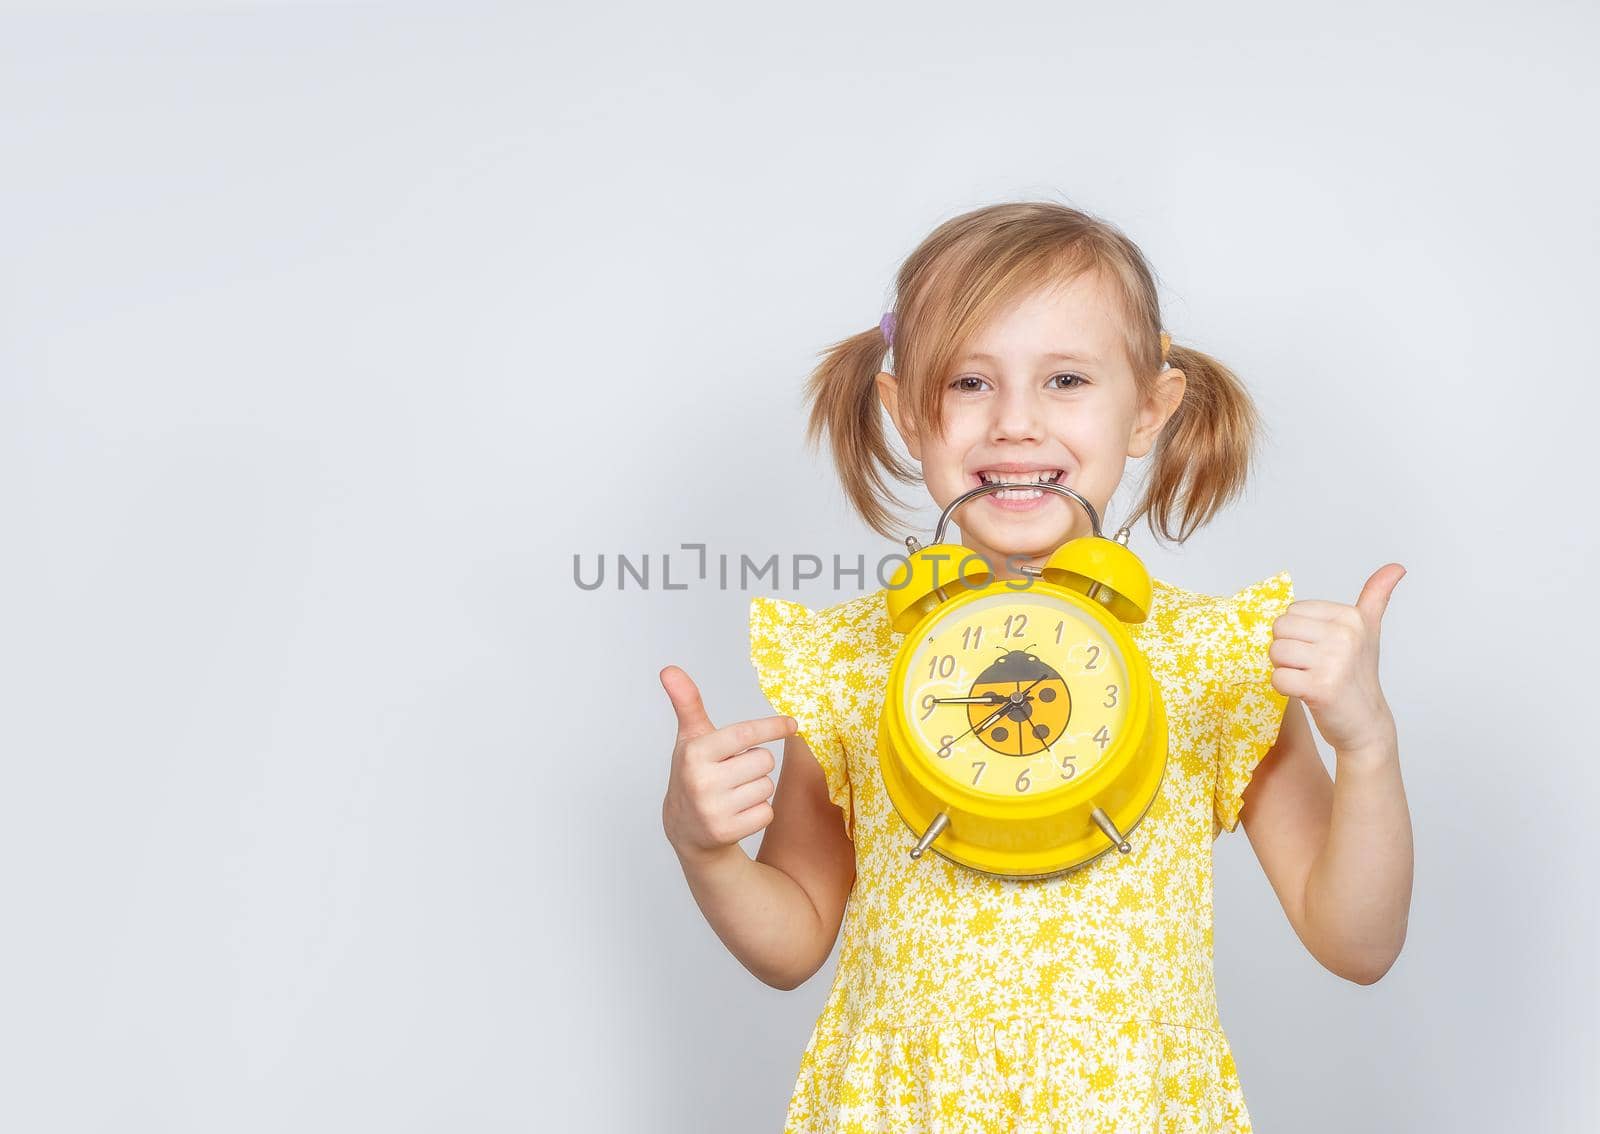 A Little Caucasian girl holds an alarm clock in her teeth and shows two thumbs up, advertisement posing against studio wall. Advertising concept